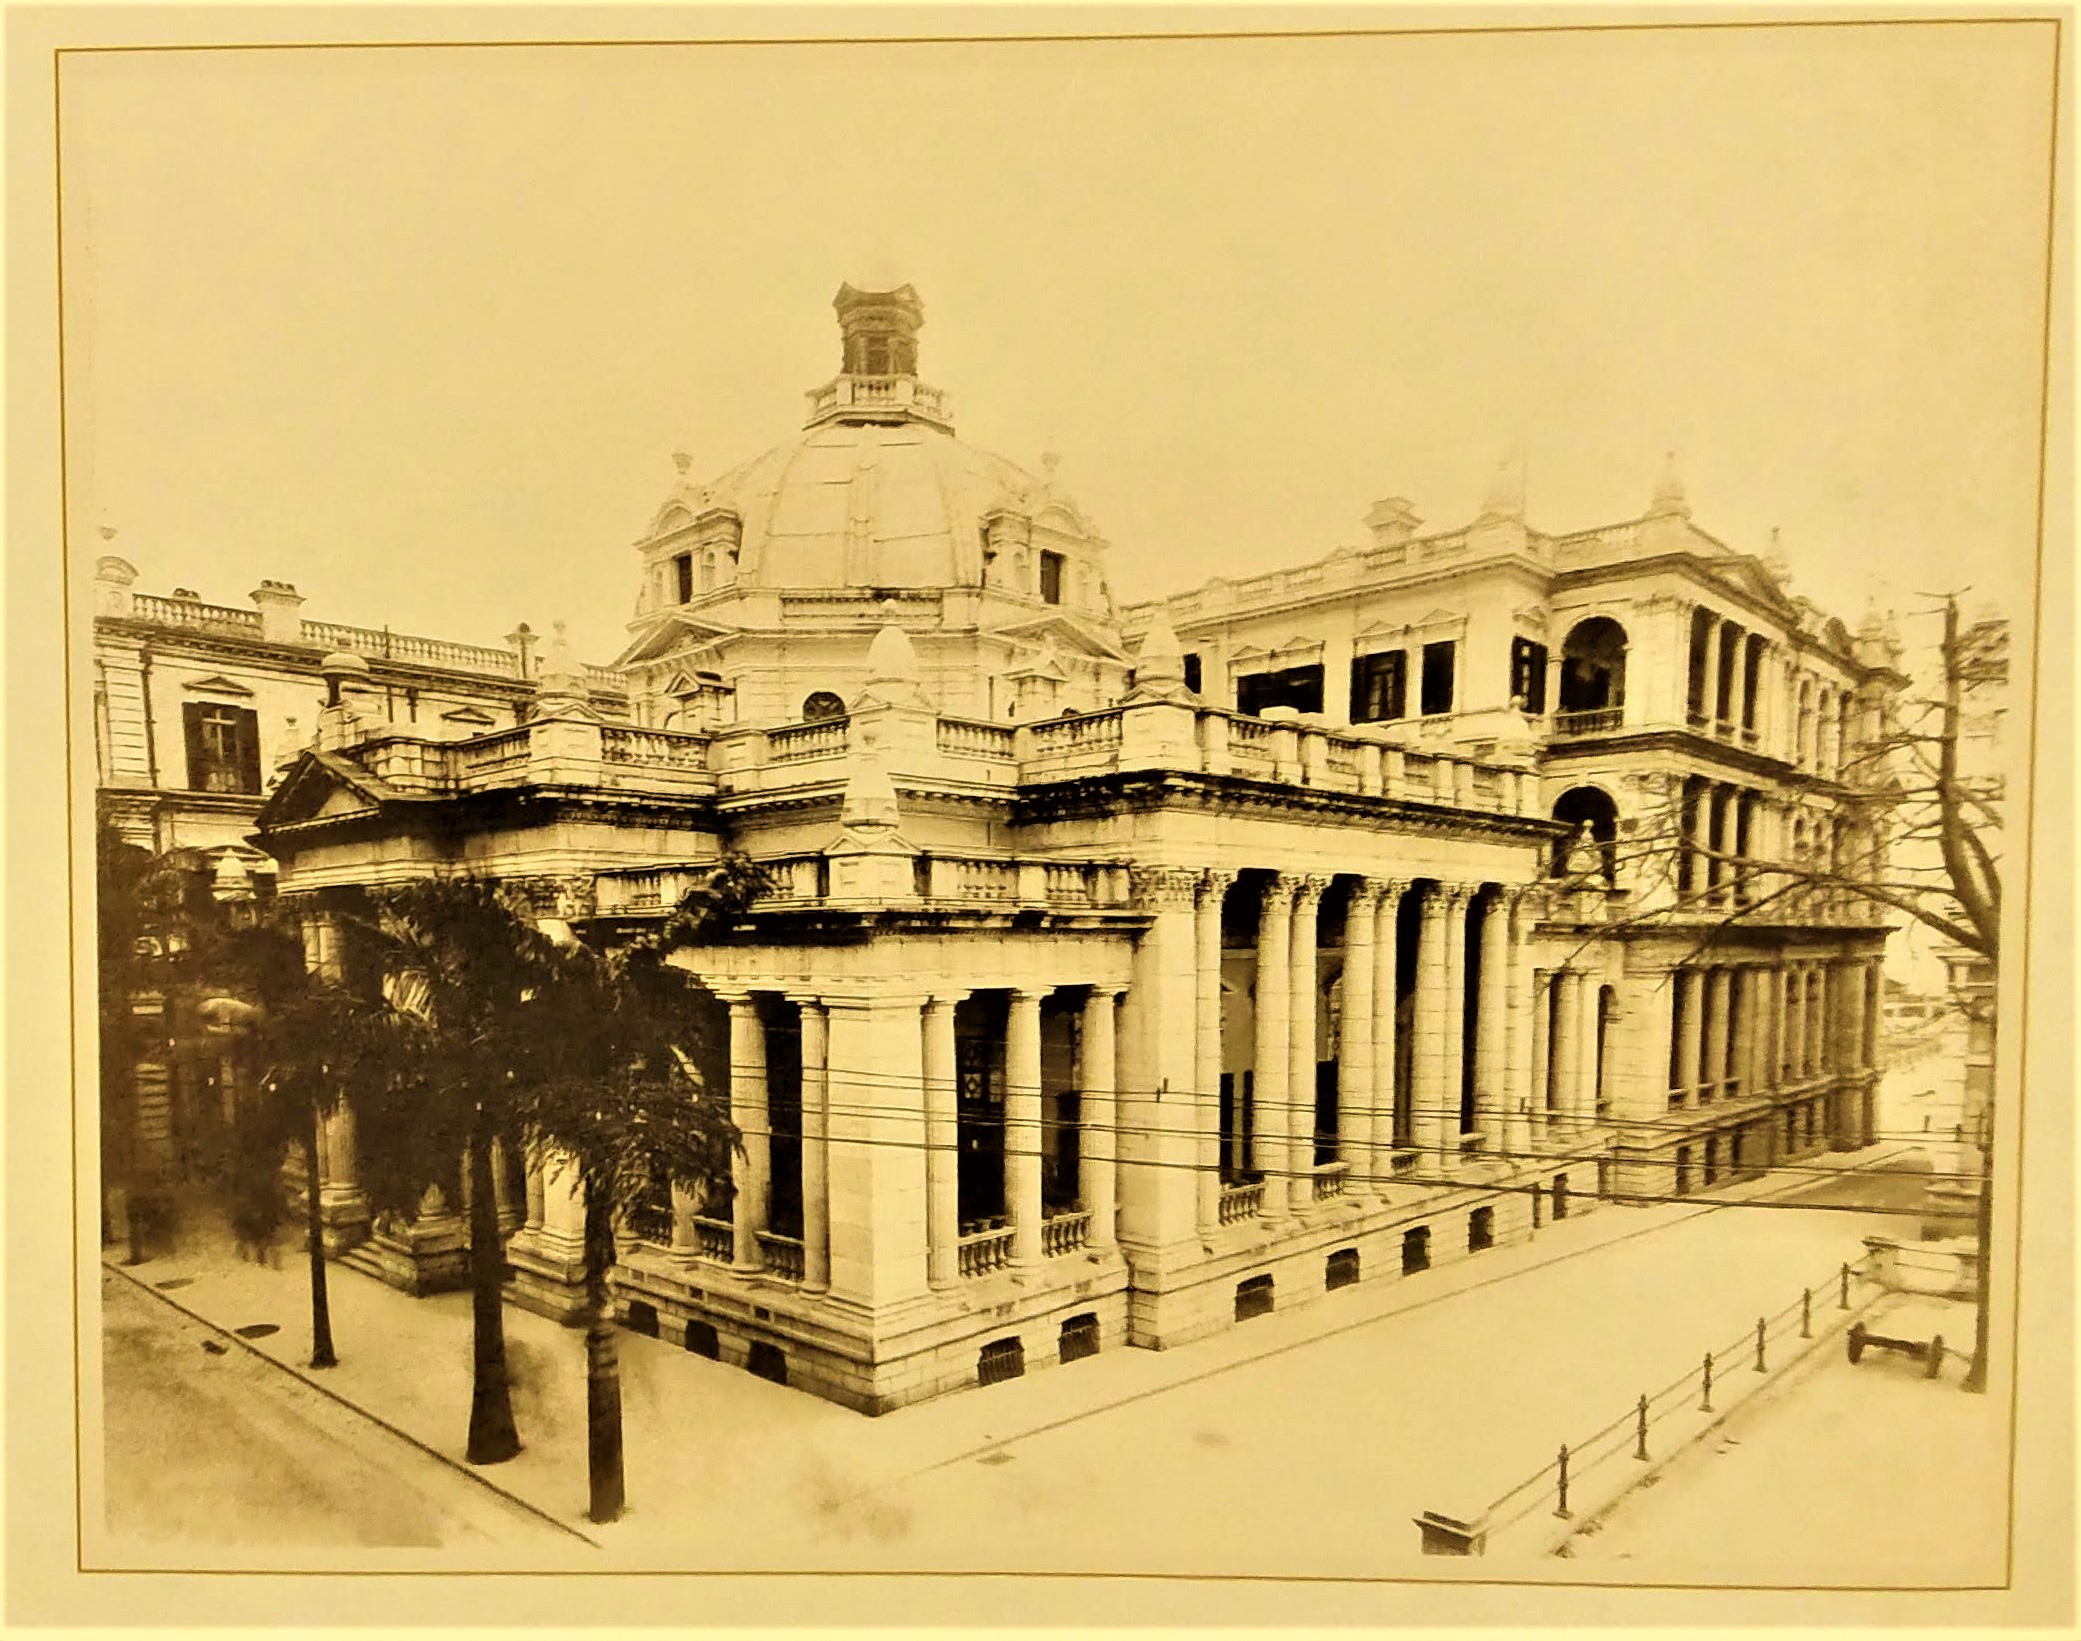 HSBC building in the past